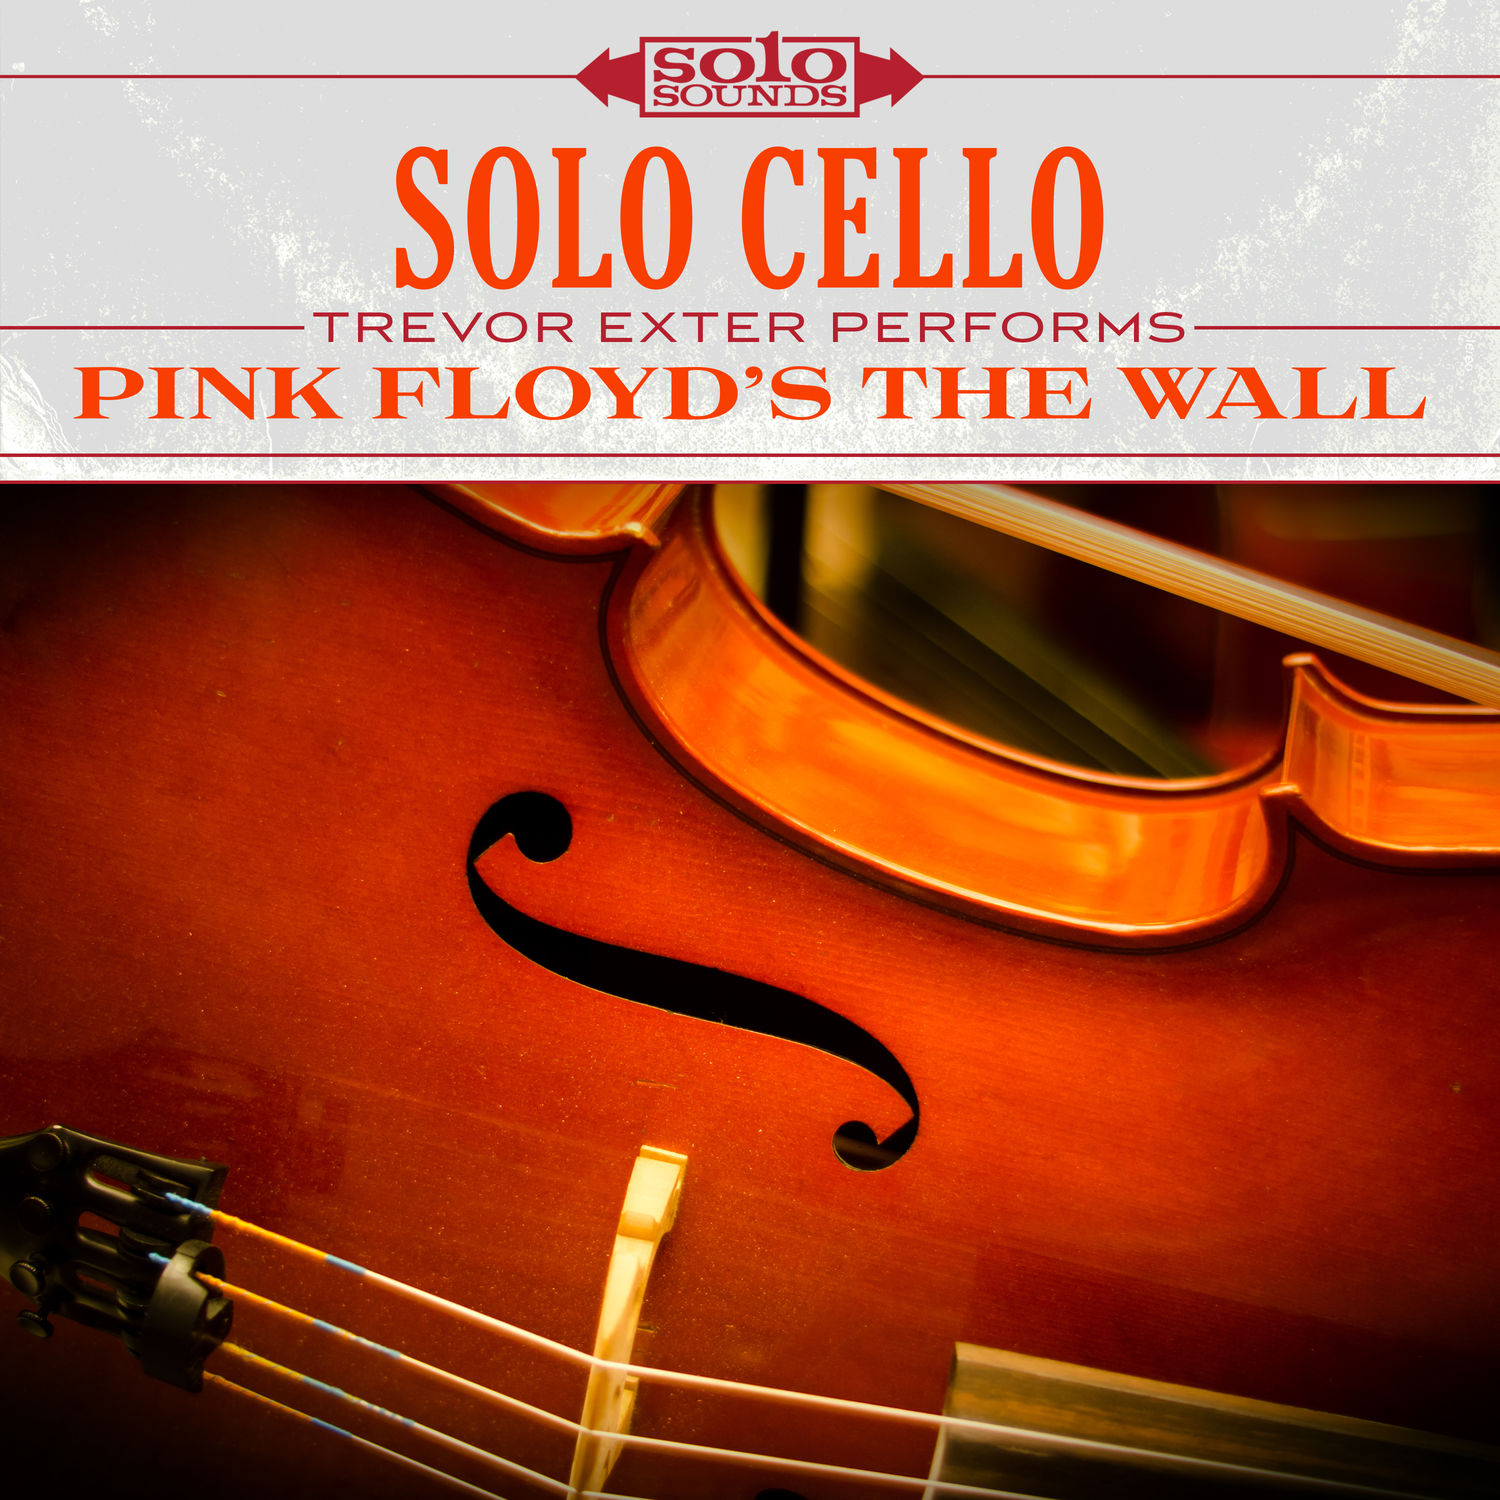 Trevor Exter – Solo Cello: Trevor Exter Performs Pink Floyd’s the Wall (2017) [FLAC 24bit/192kHz]